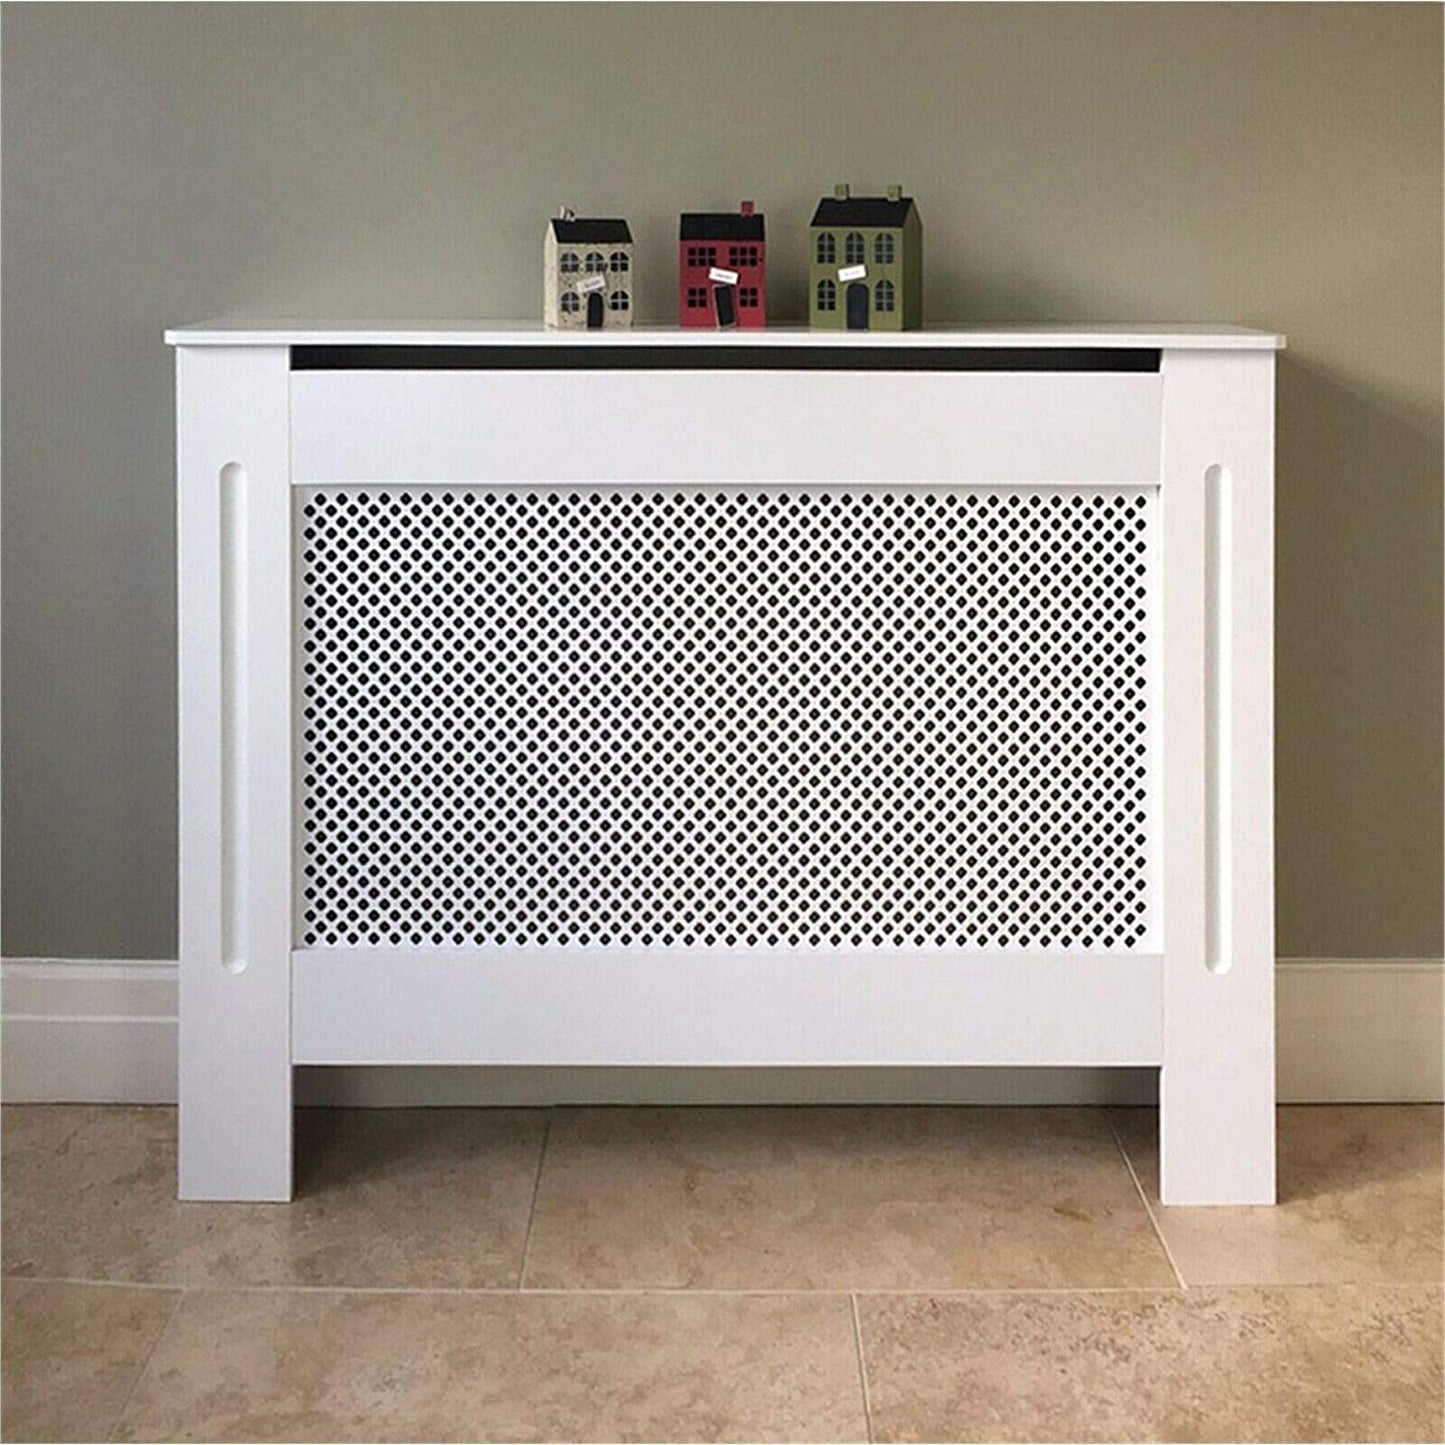 HYGRAD BUILT TO SURVIVE Chic Free Standing White Wooden MDF Radiator Heater Cover Grill Cabinet Guard Shelf Hallway Furniture HYGRAD BUILT TO SURVIVE